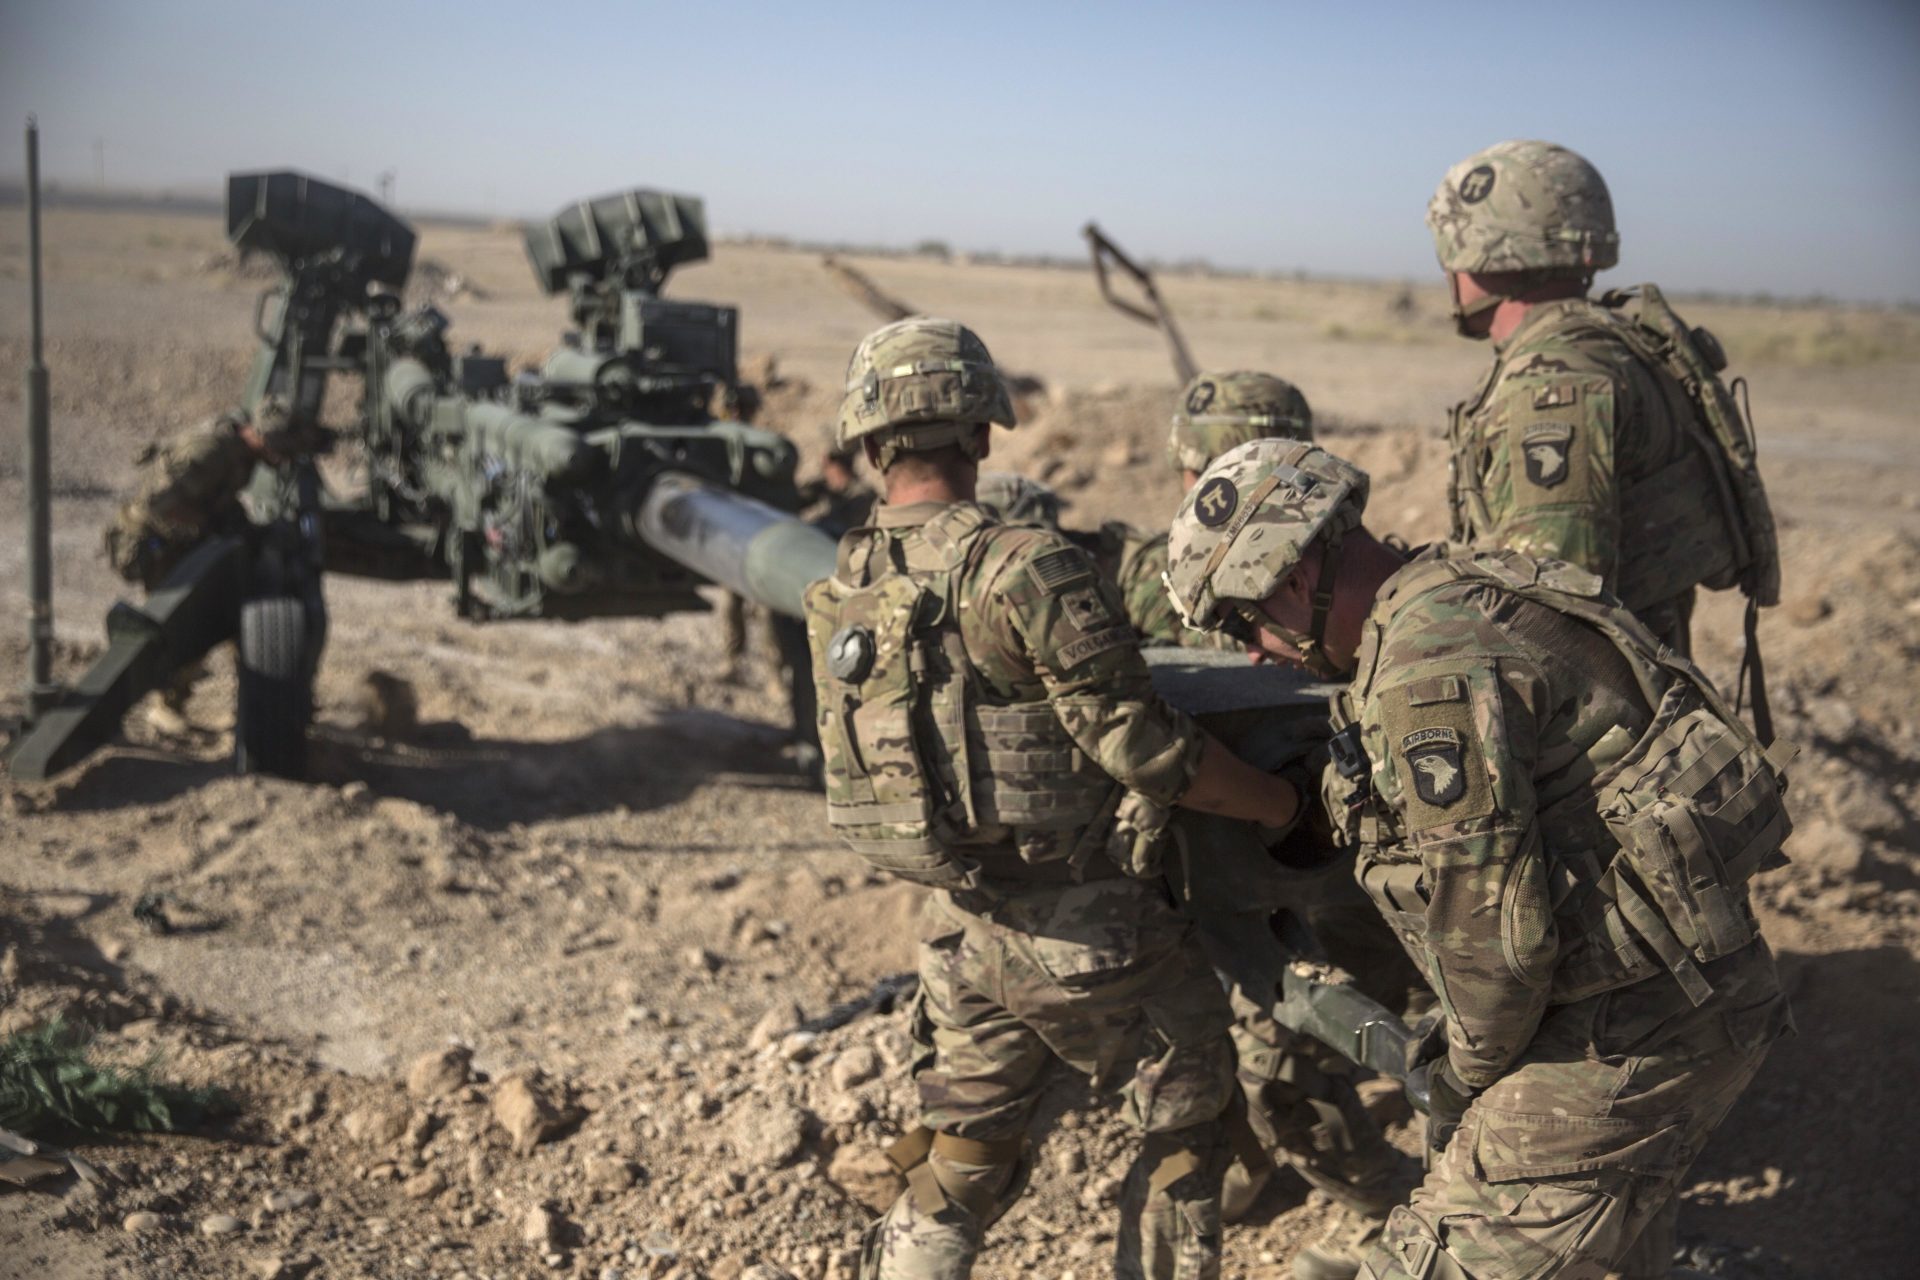 This June 10, 2017 photo provided by Operation Resolute Support, U.S. Soldiers with Task Force Iron maneuver an M-777 howitzer, so it can be towed into position at Bost Airfield, Afghanistan. Sixteen years into its longest war, the United States is sending another 4,000 troops to Afghanistan in an attempt to turn around a conflict characterized by some of the worst violence since the Taliban were ousted in 2001. They are also facing the emergence of an Islamic State group affiliate and an emboldened Taliban, who by Washington’s own watchdog’s assessment now control nearly half of Afghanistan.